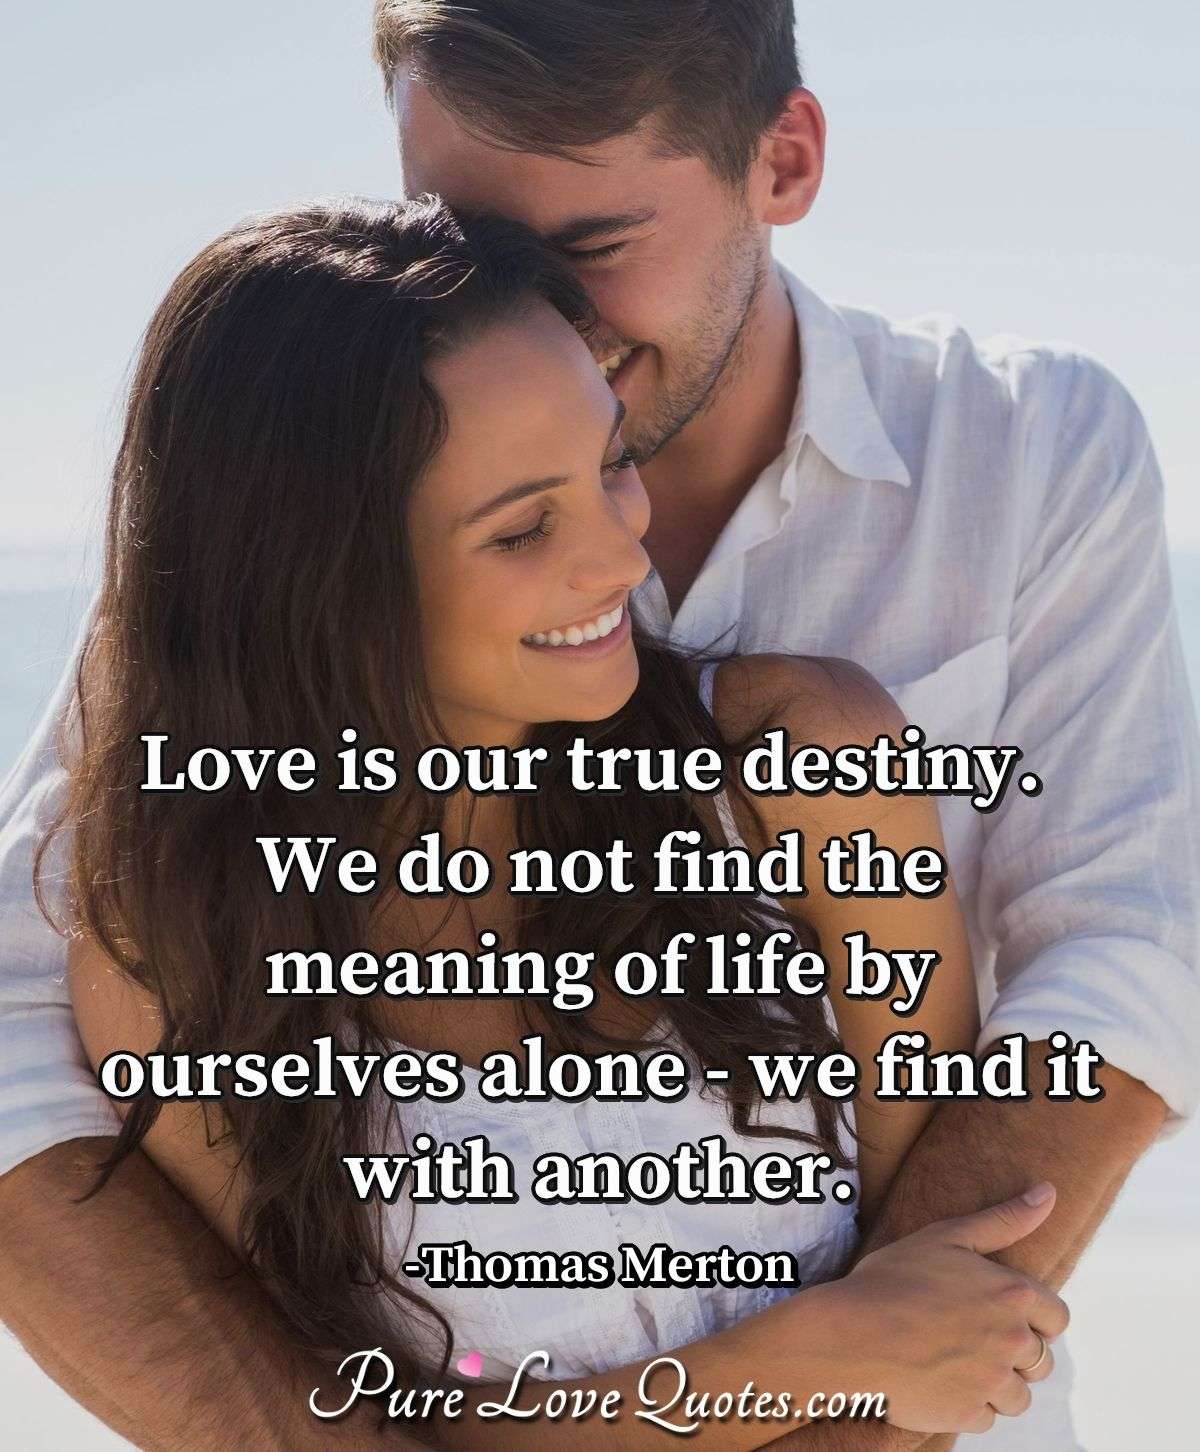 Love is our true destiny. We do not find the meaning of life by